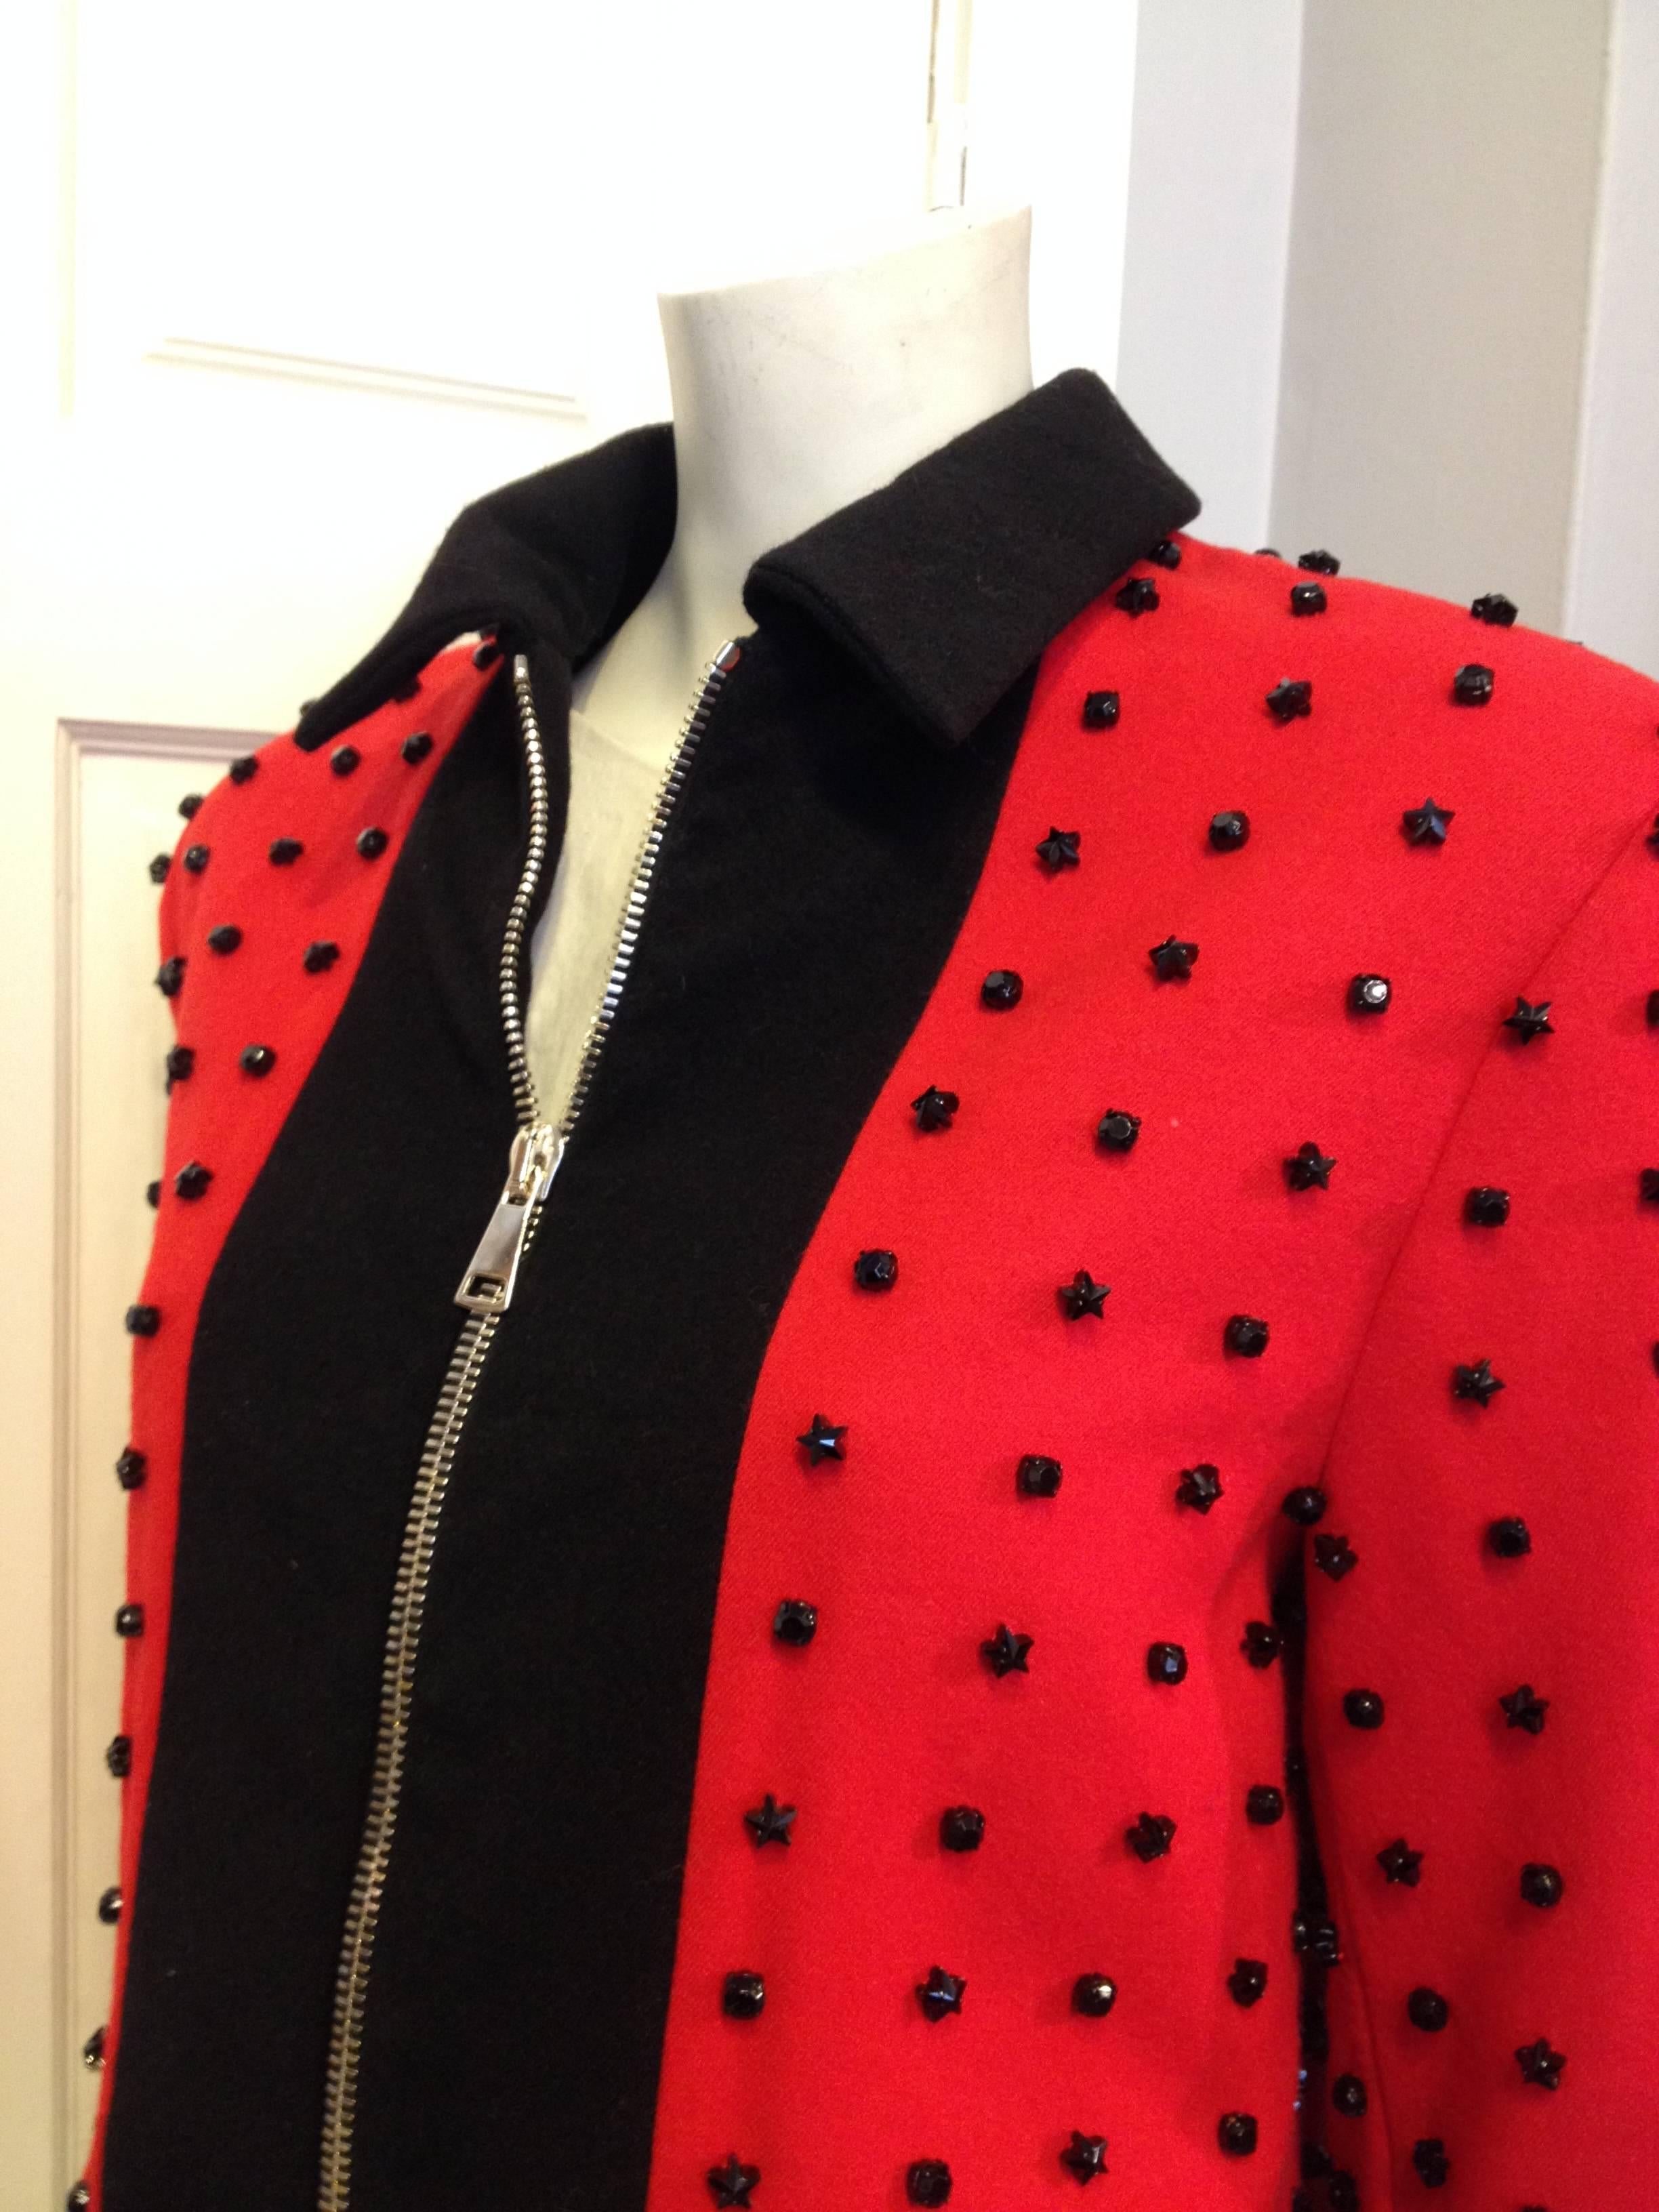 Women's or Men's Givenchy Red Runway Jacket Black Star Embellishment Fall-Winter 2012-2013 Sz 38 For Sale